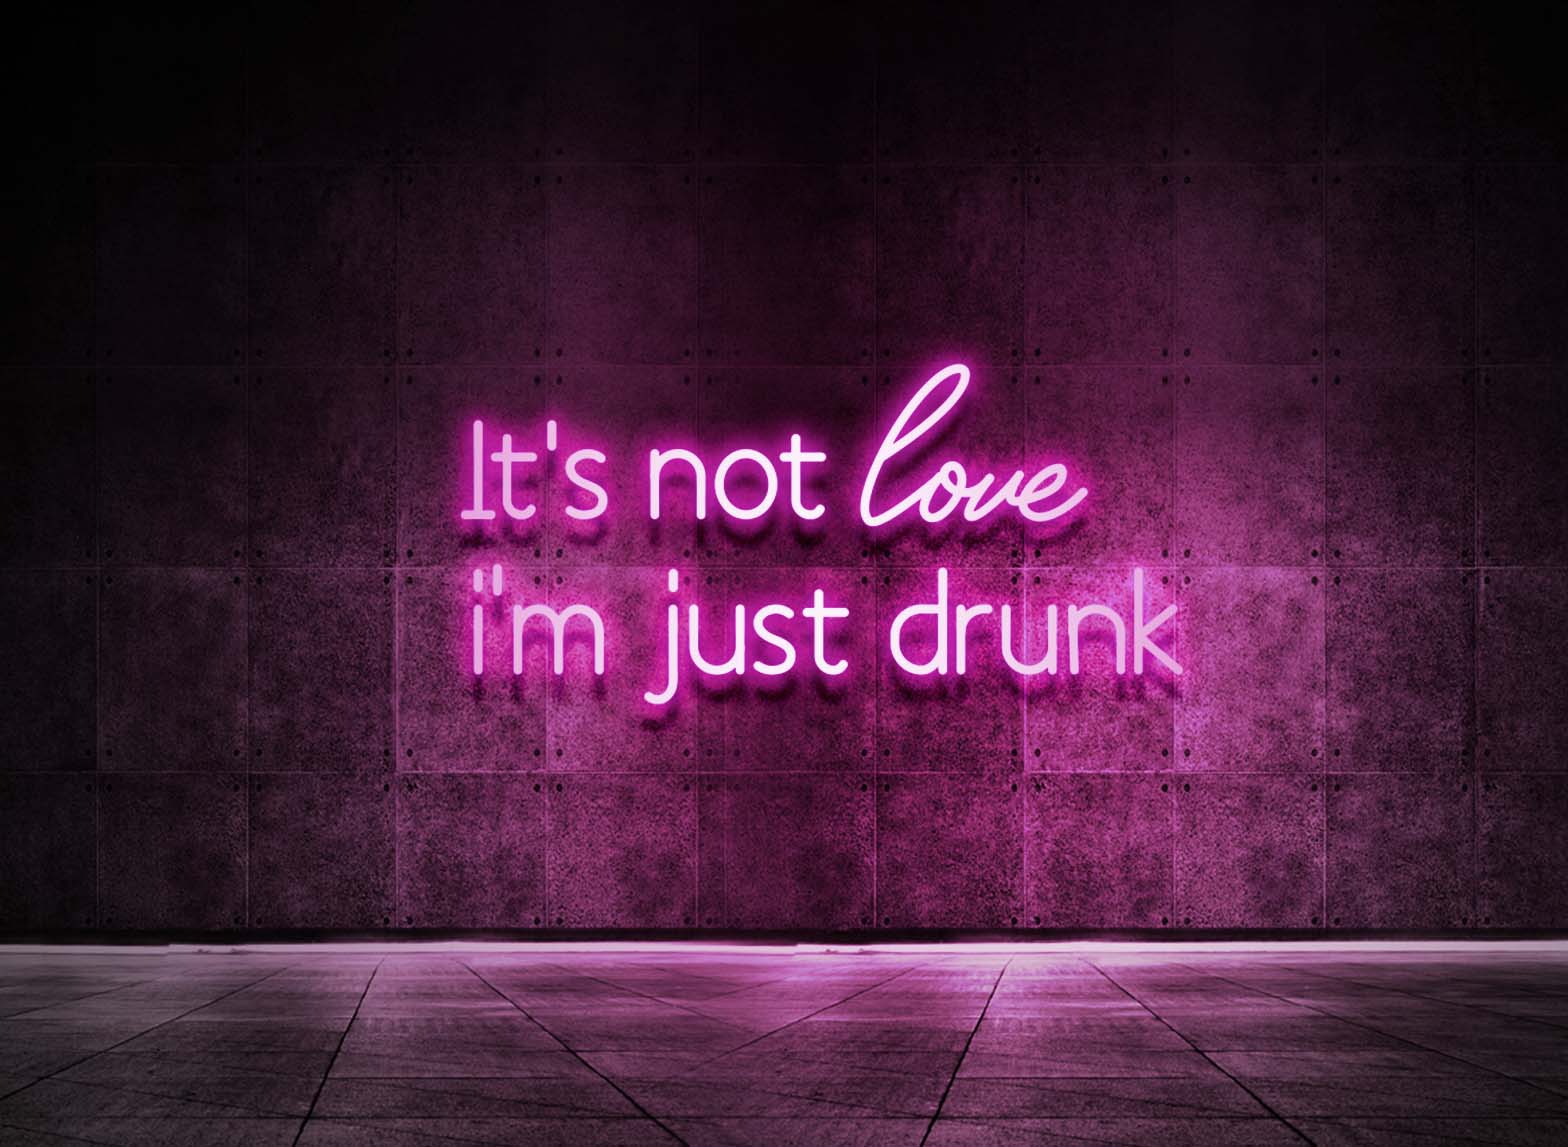 IT'S NOT LOVE I'M JUST DRUNK